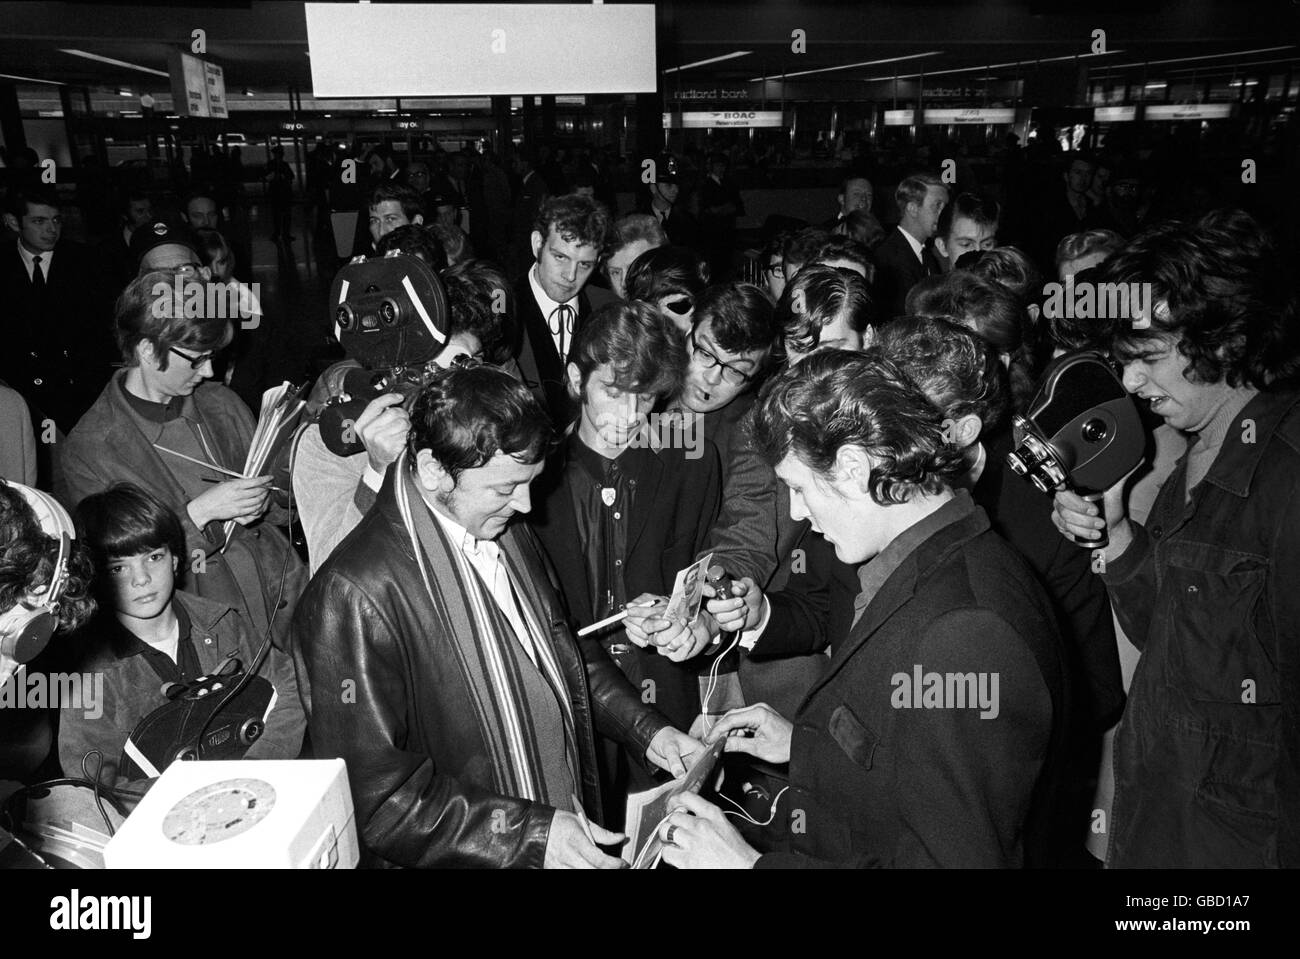 Music - Gene Vincent - Heathrow Airport - London - 1969. Fans mob rock n roll singer Gene Vincent for his autograph on arrival at Heathrow Airport from Paris. Stock Photo